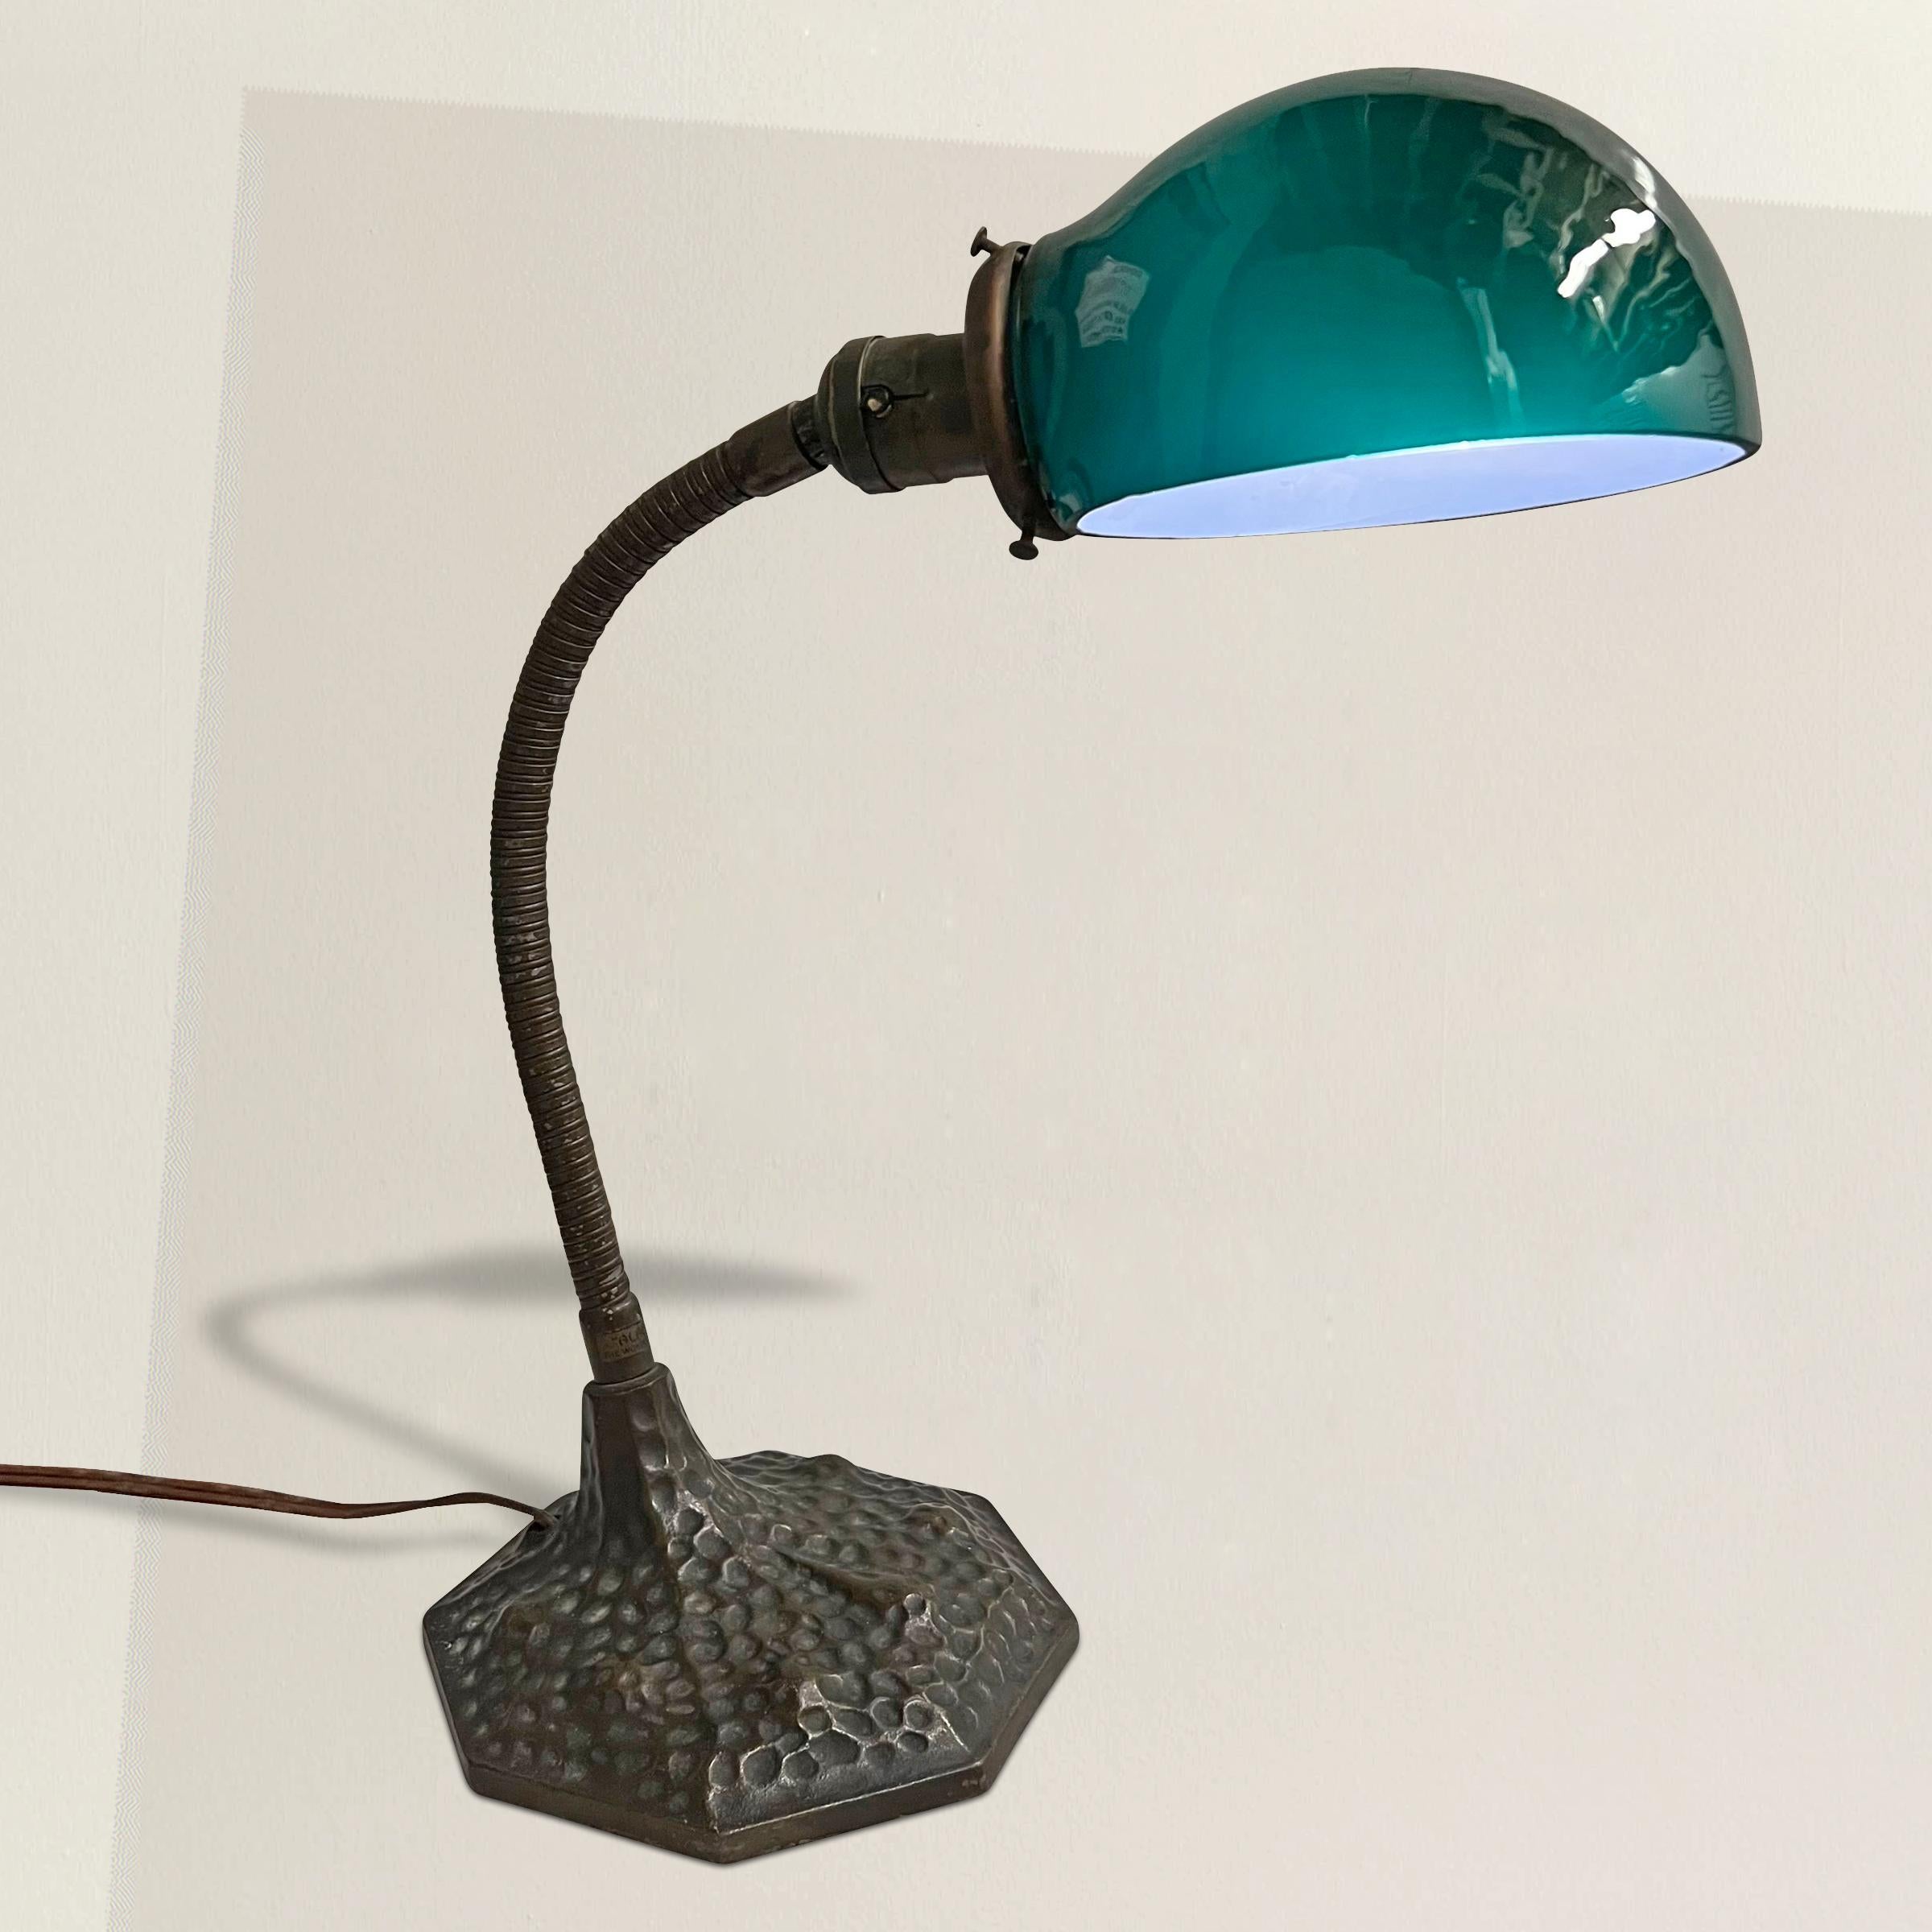 This early 20th-century American gooseneck table lamp exudes a timeless elegance that's bound to captivate any admirer of vintage lighting. Its original green glass shade adds a touch of nostalgia and sophistication to the piece, casting a warm and